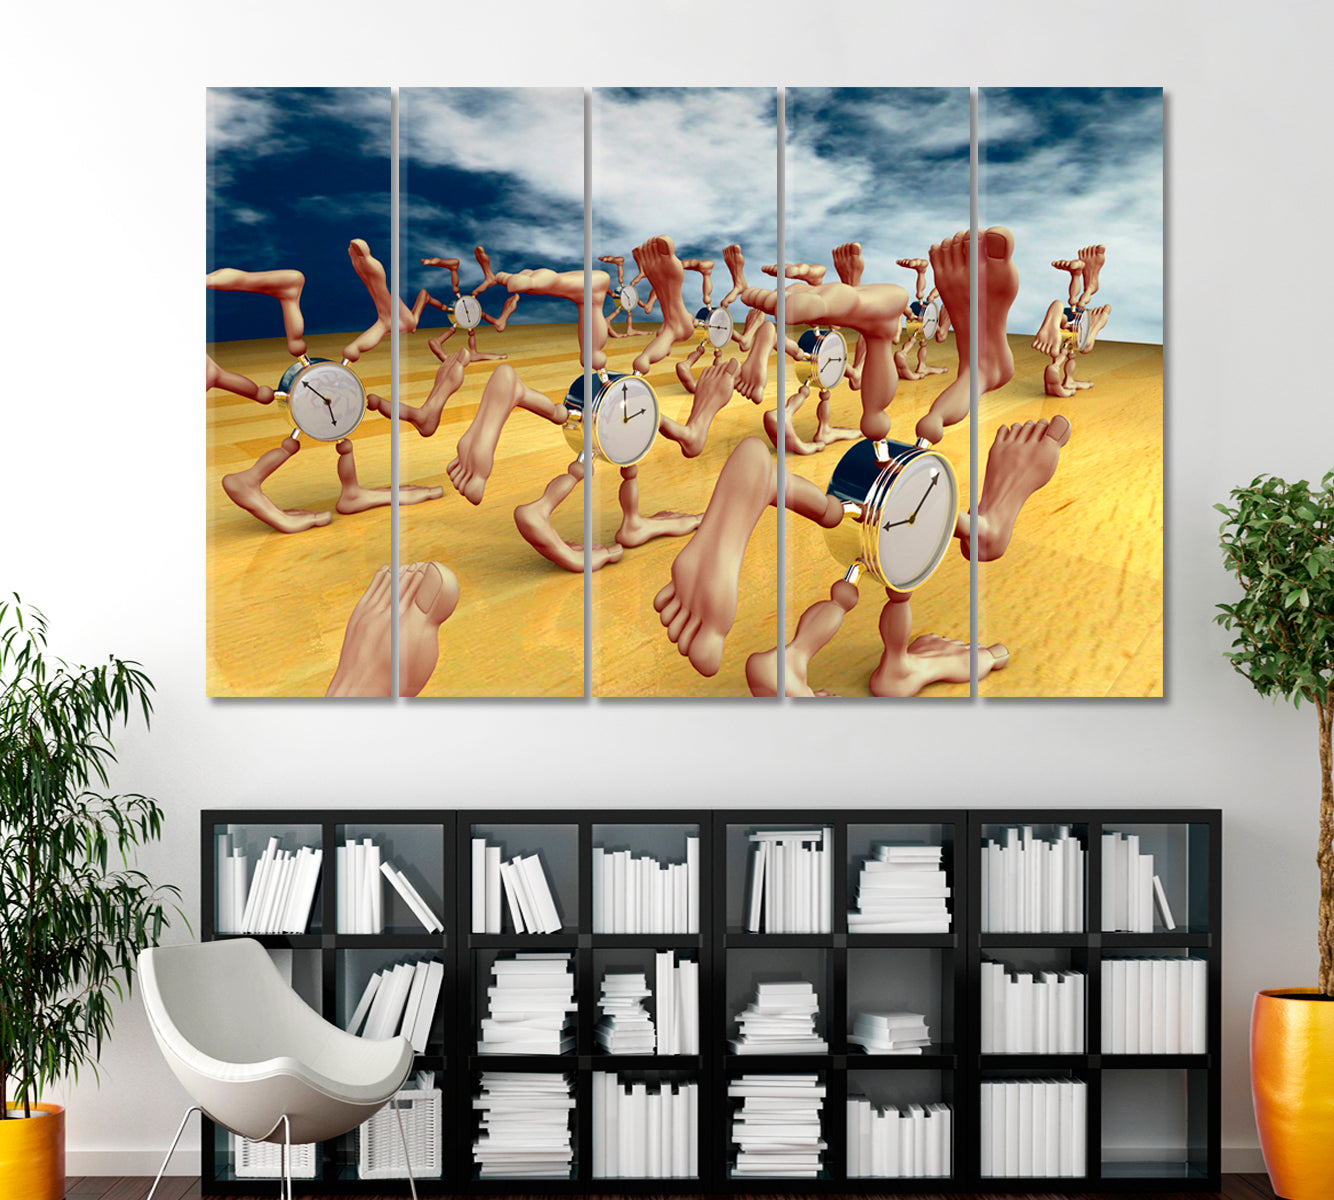 THE TIME HAS COME Inspirid by Dali Running Сlocks with Lots of Legs Surreal Fantasy Large Art Print Décor Artesty 5 panels 36" x 24" 